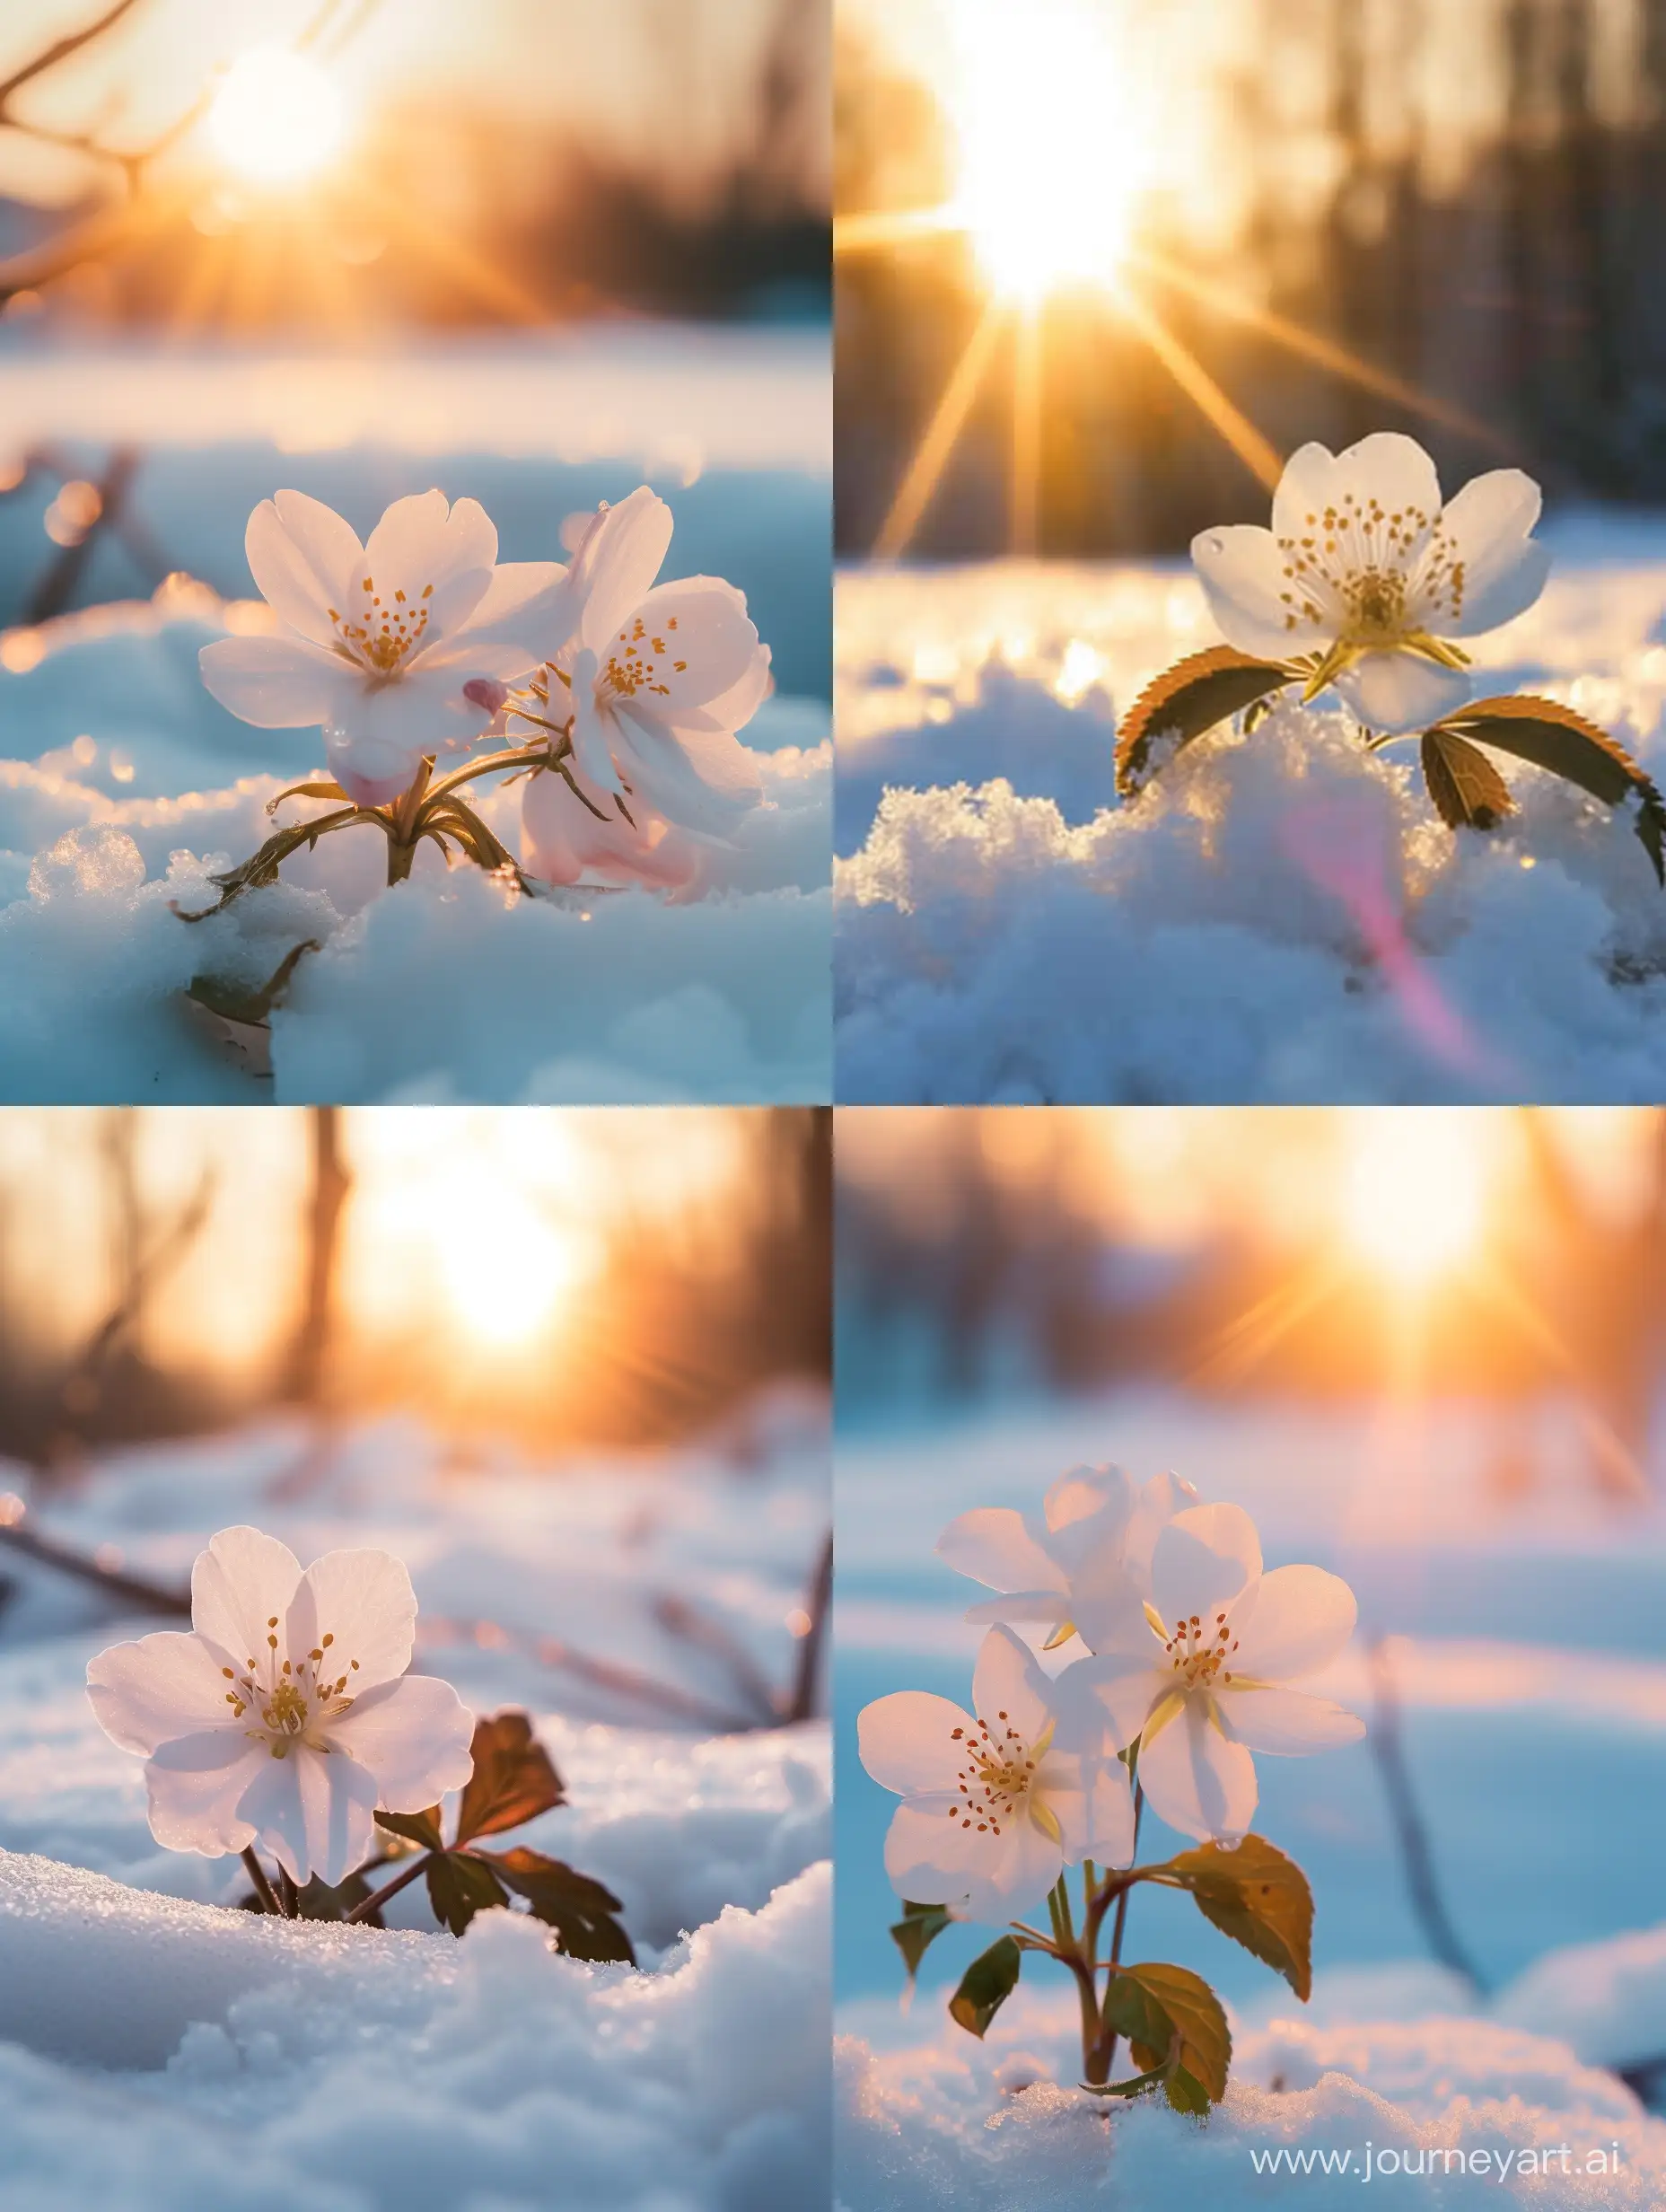 Ethereal-White-Flower-Blooming-in-Snowy-Sunrise